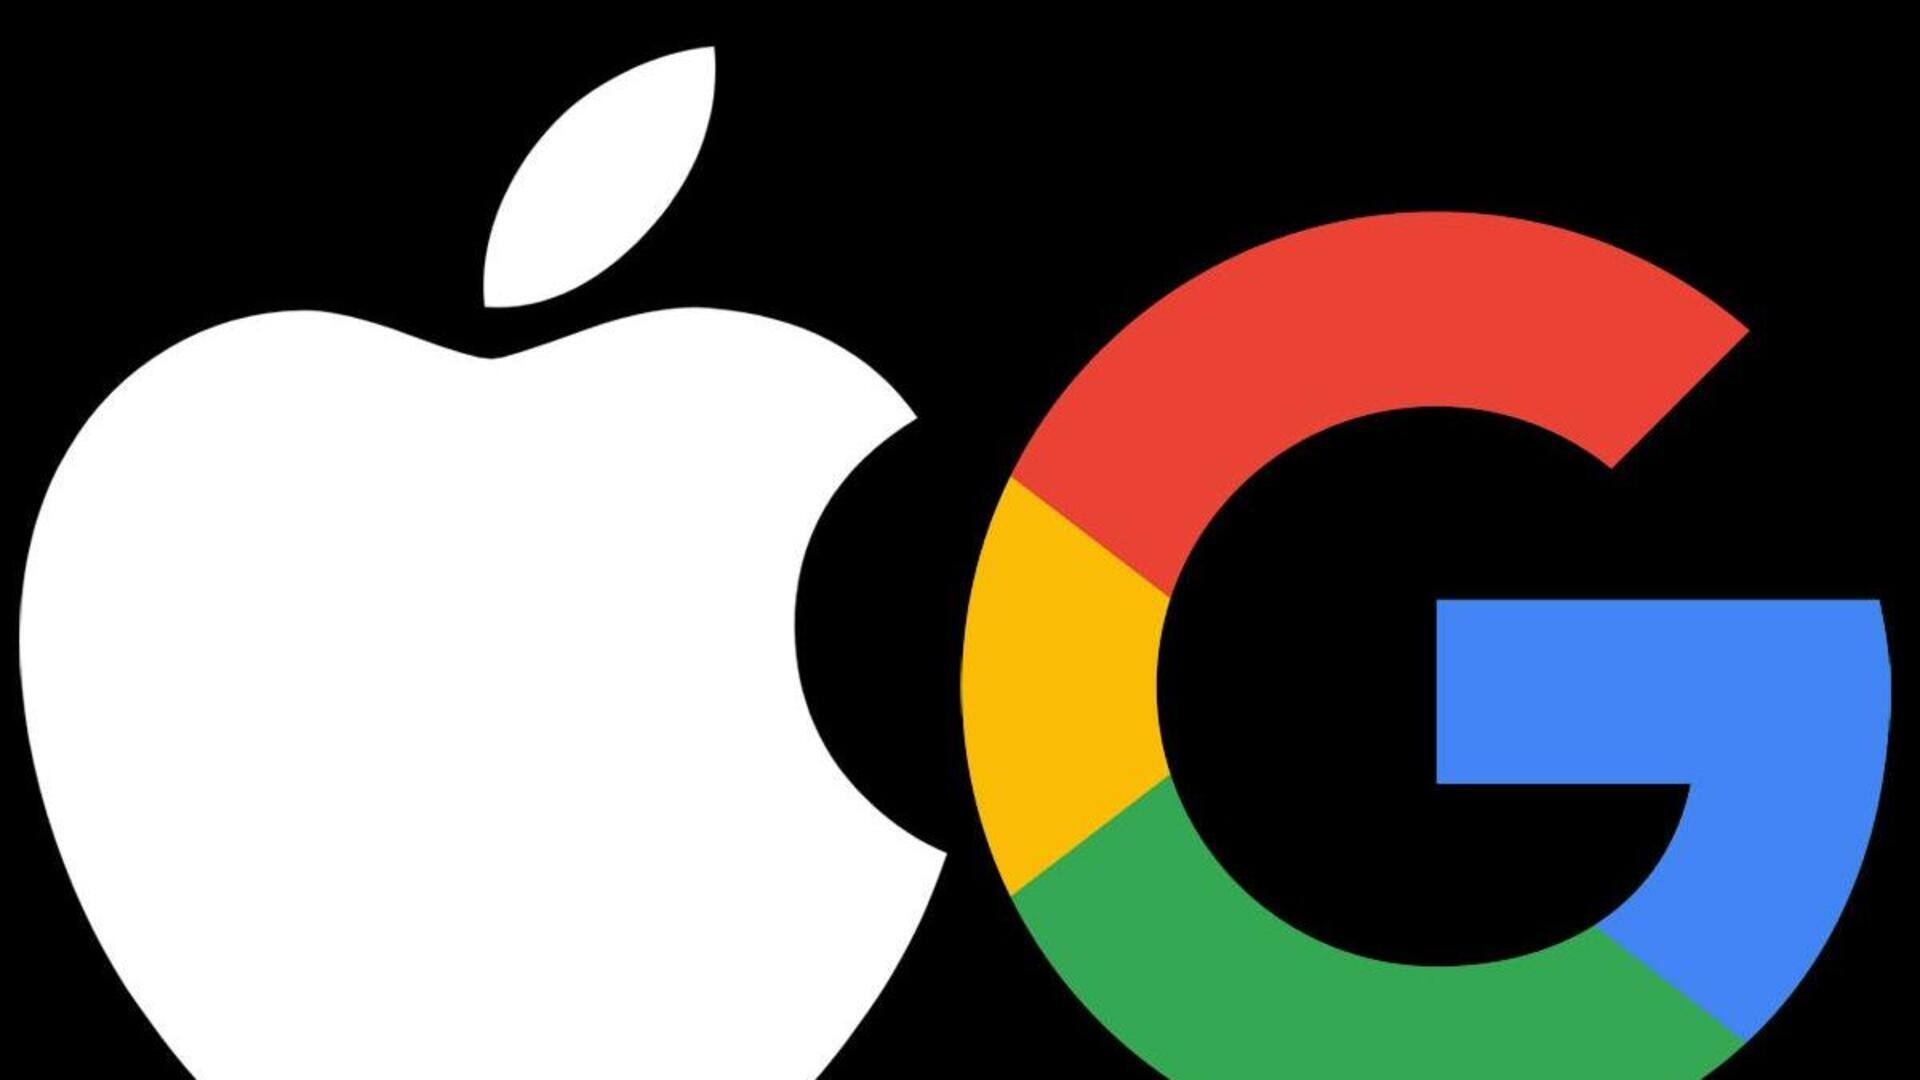 Apple is eyeing Google collaboration for AI-enhanced iPhone features